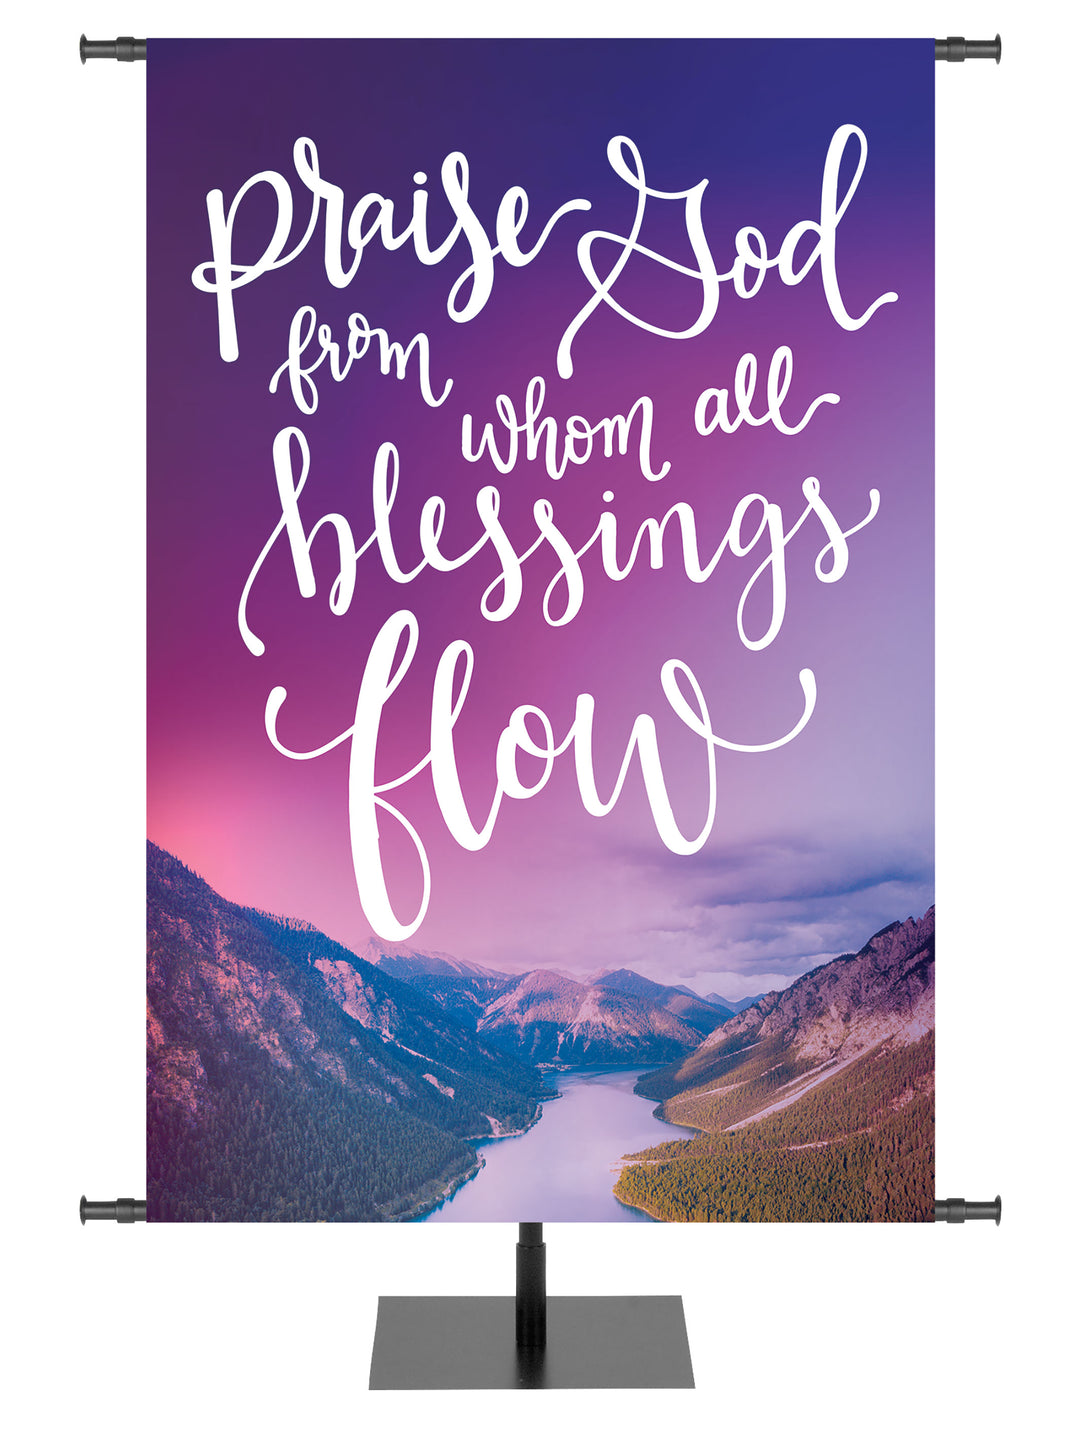 Praise God From Whom All Blessings Flow Blue Mountain River Church Banner